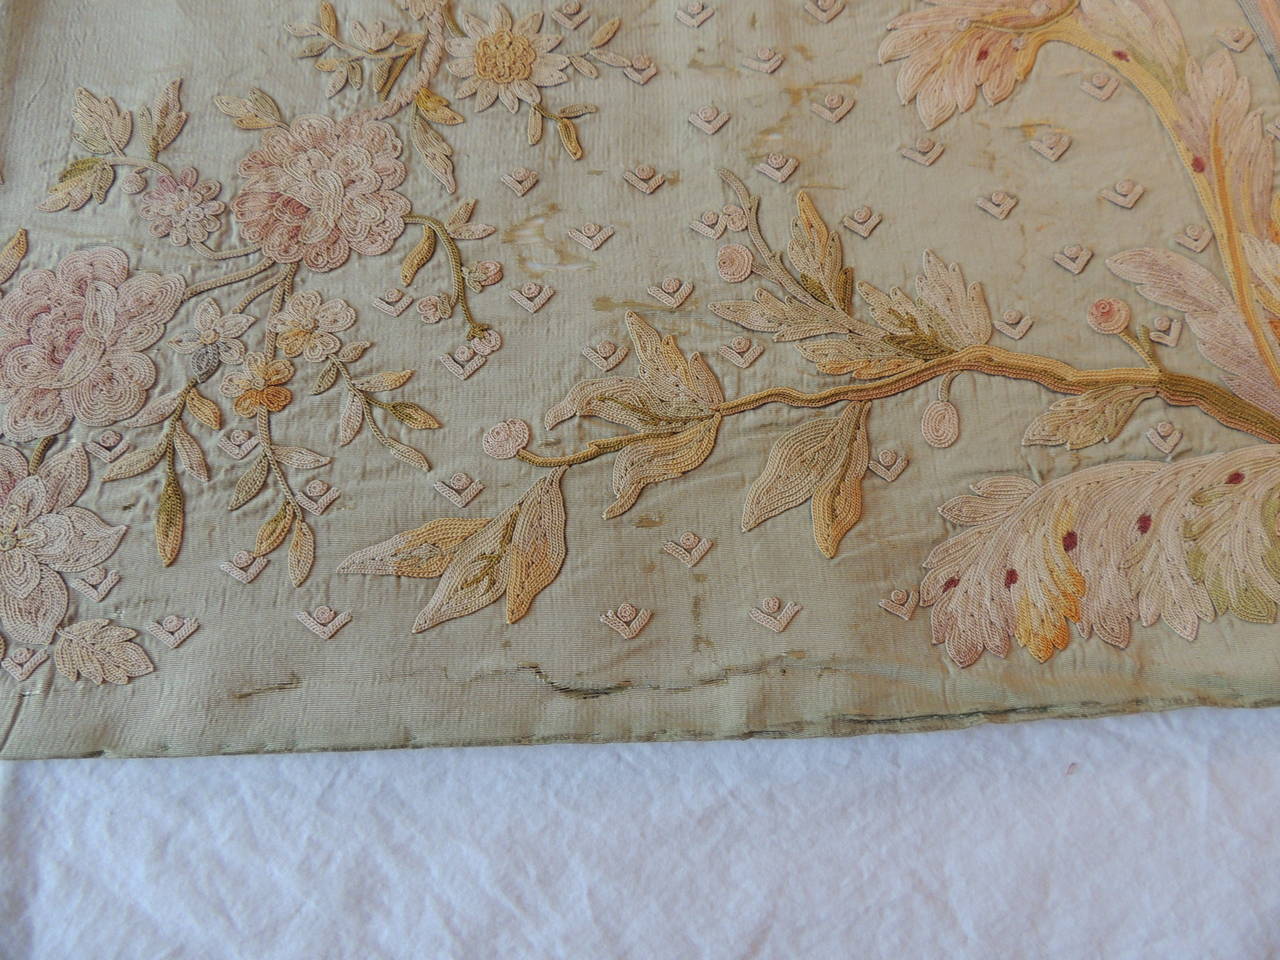 Louis XVI Collection of Antique Textiles 18th Century Embroidery Panel For Sale